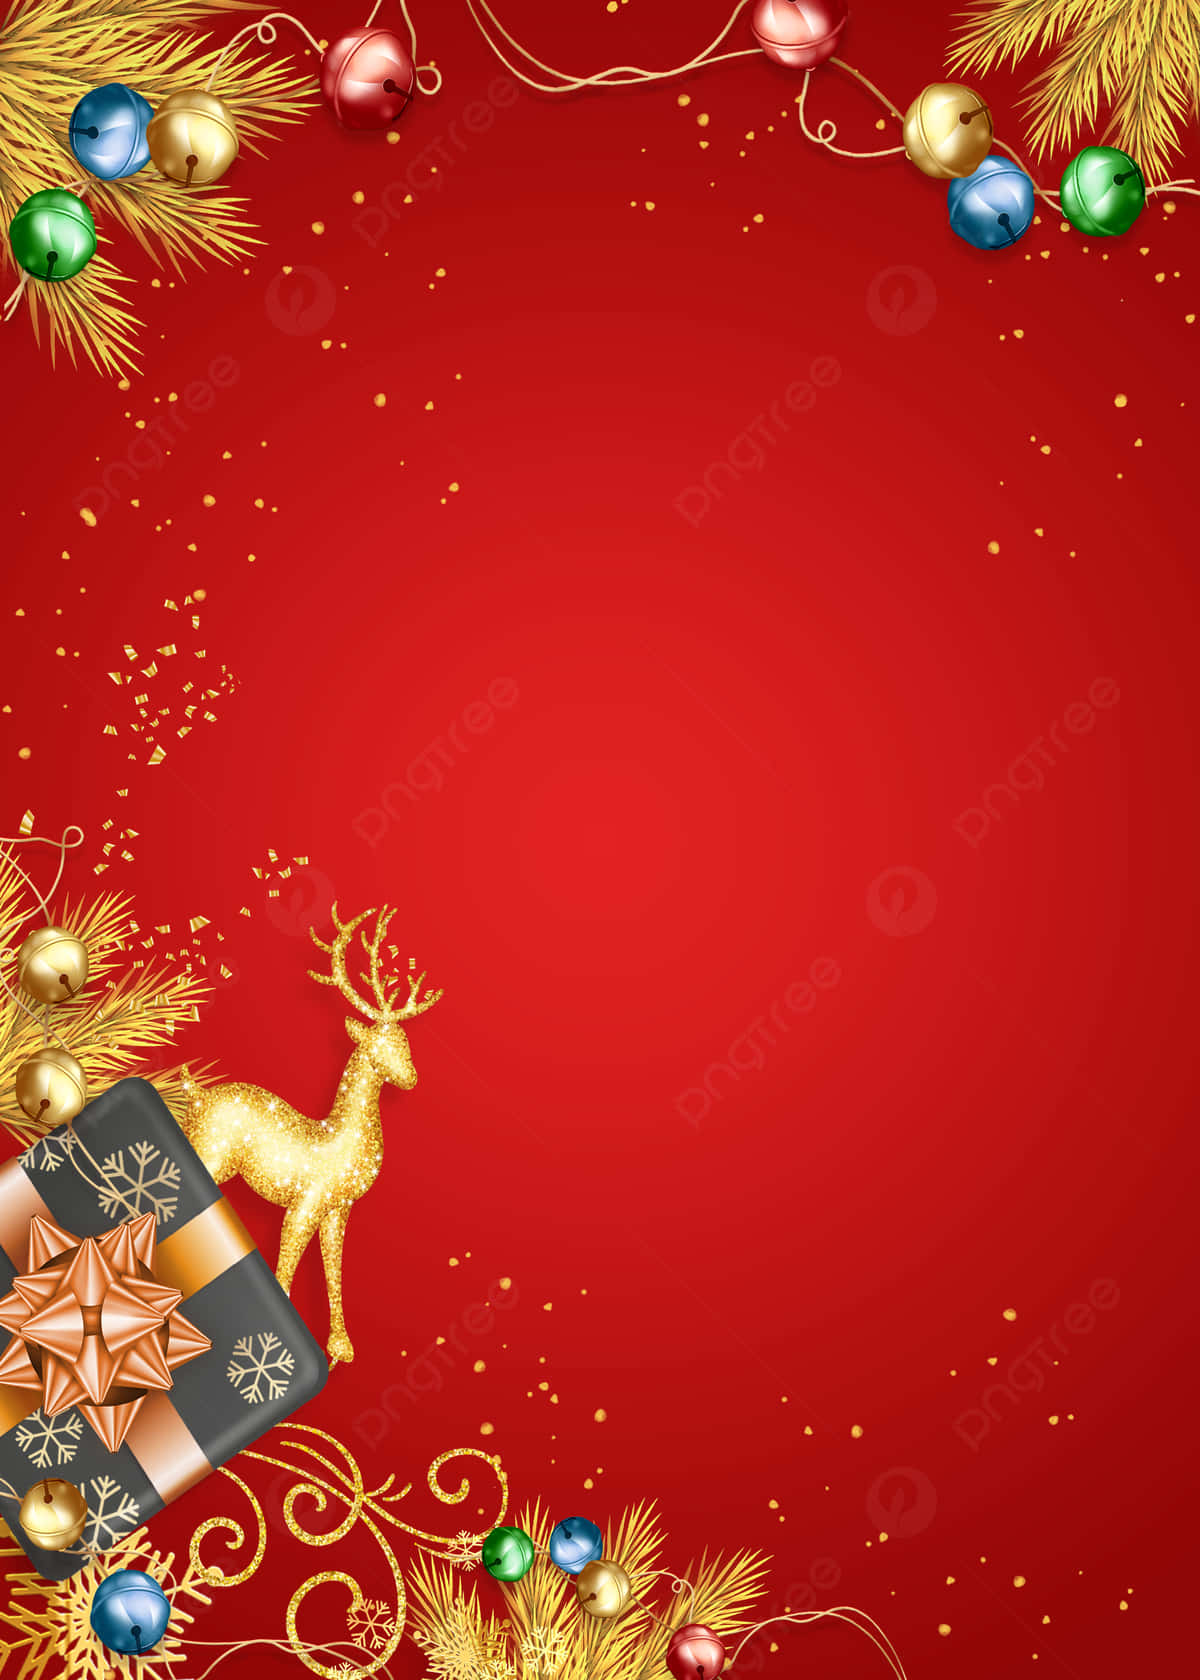 Christmas Background With Deer And Christmas Decorations